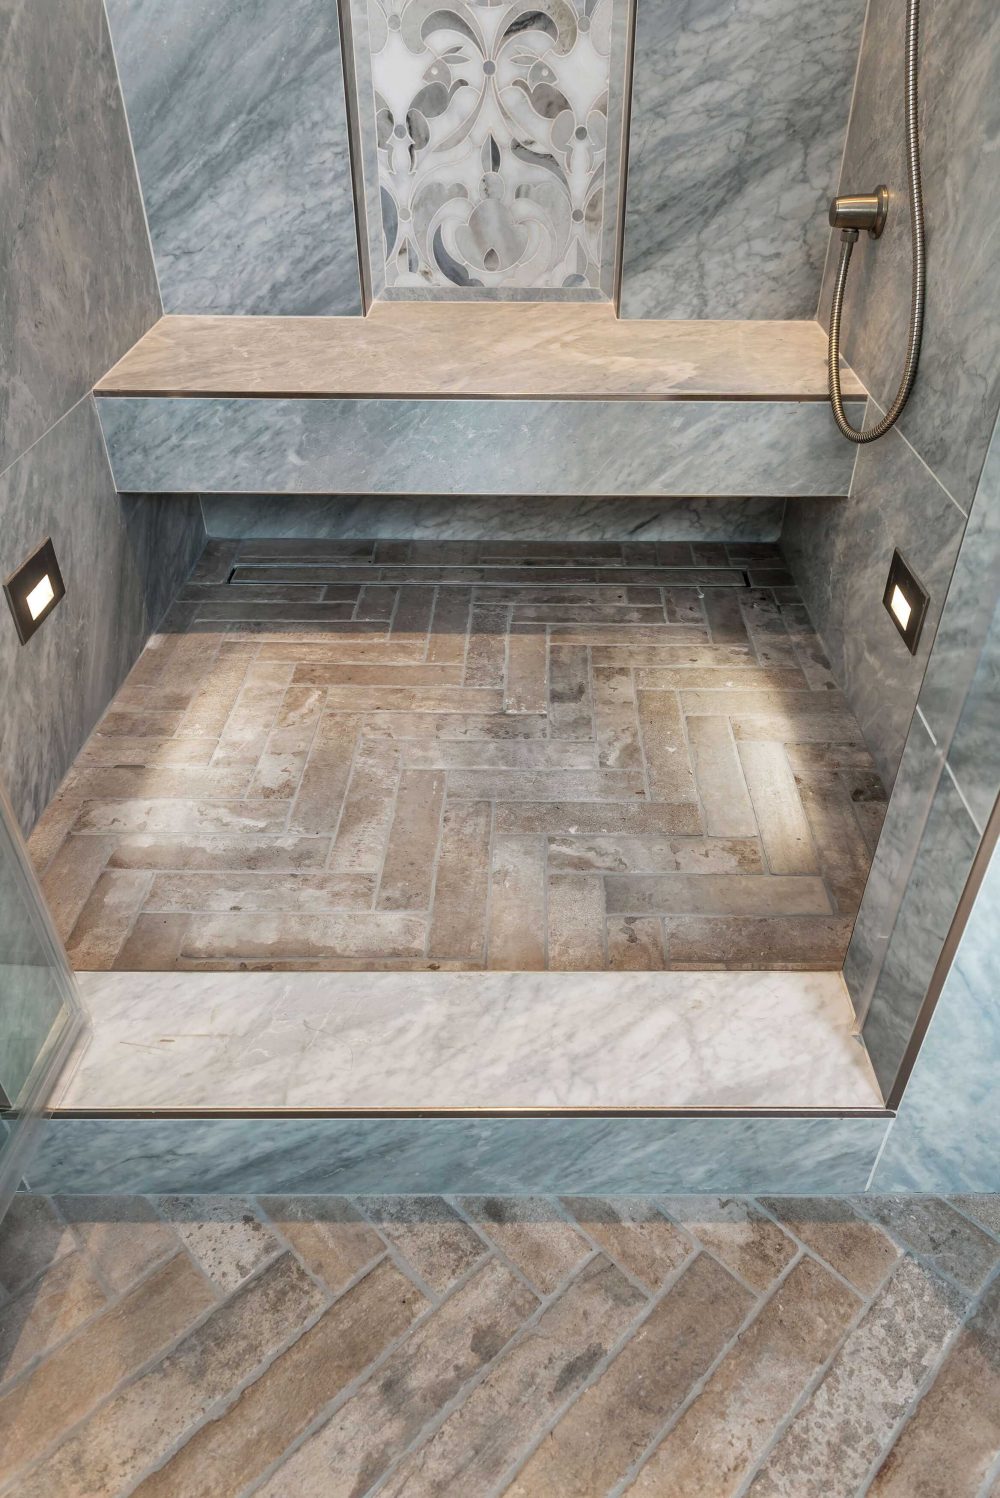 Close up of shower stall and patterned floor made from different stone. Built-in bench with grey and stone floral inlay design